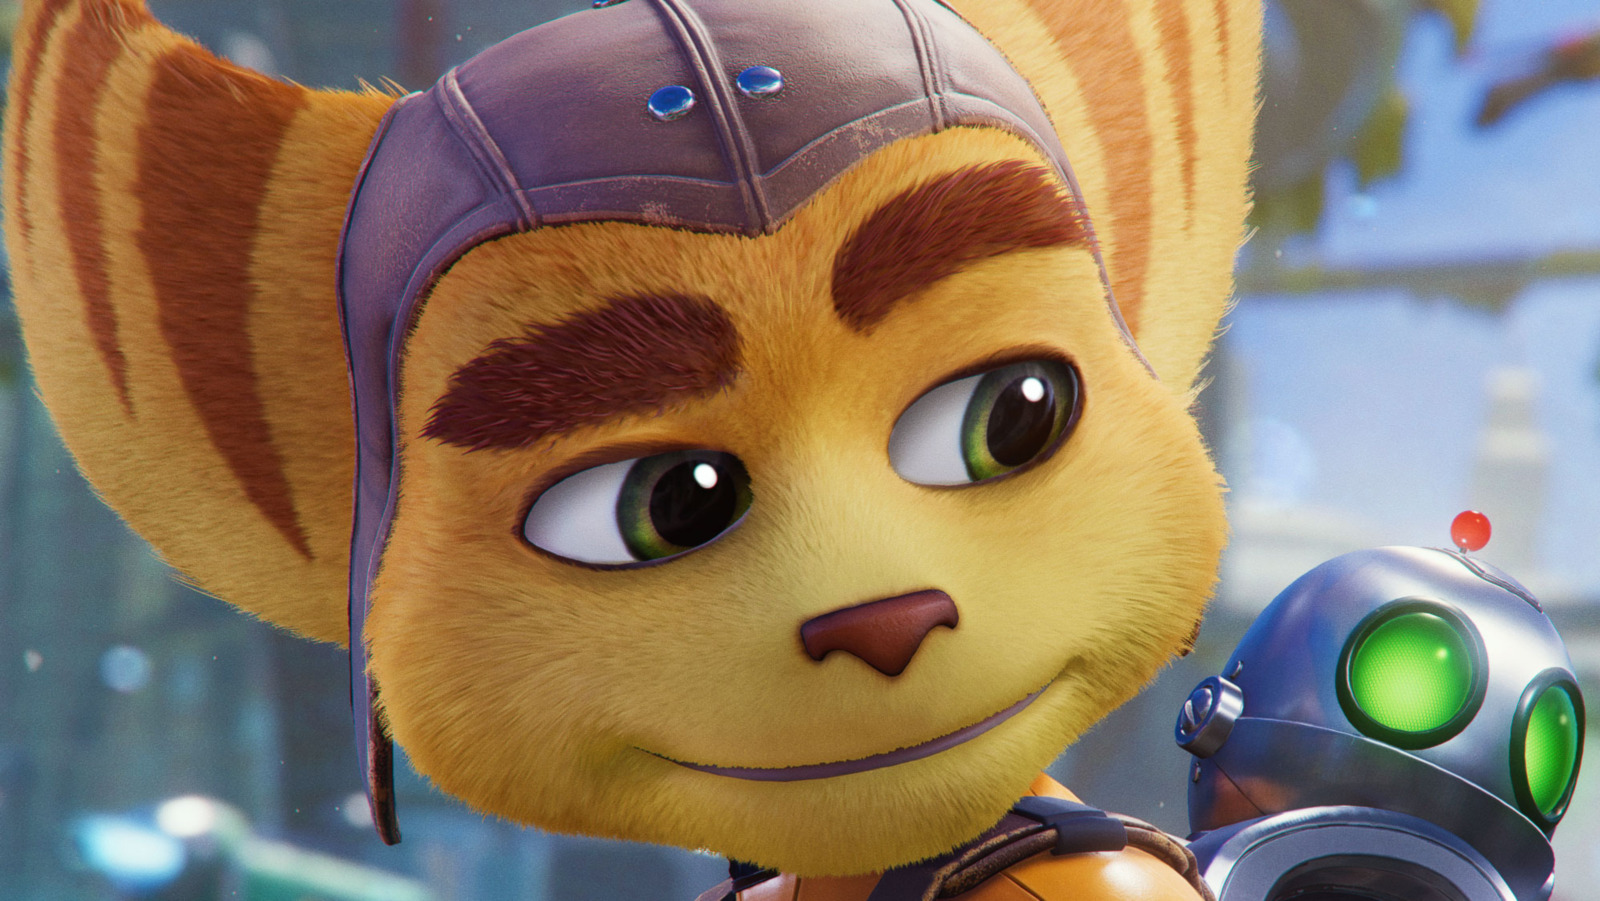 Play Ratchet & Clank: Rift Apart now in Dreams on PS4